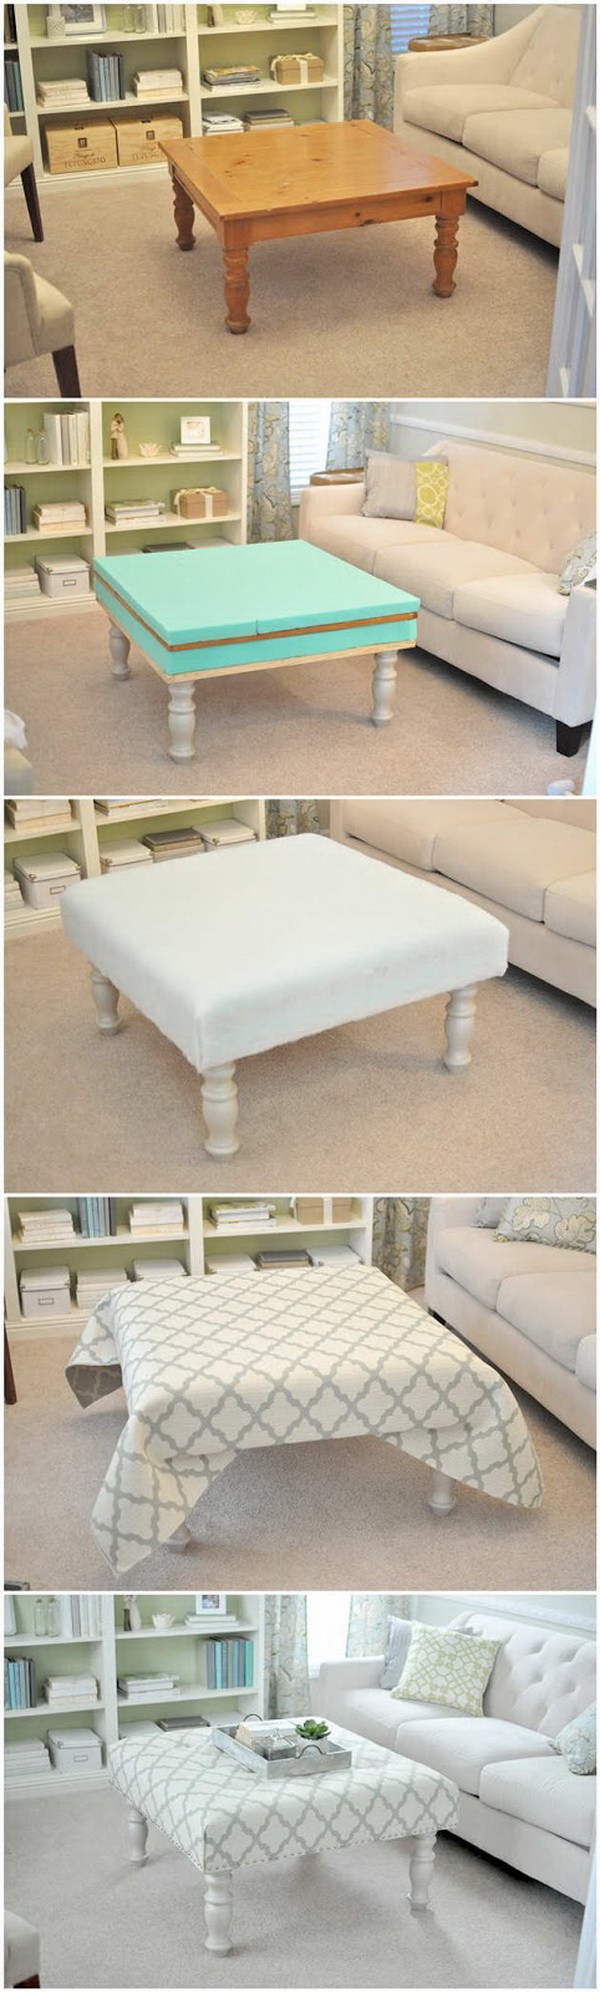 DIY Upholstered Coffee Table Ottoman: This upholstered coffee table ottoman looks so beautiful and awesome and adds more comfort and style to your living space! 